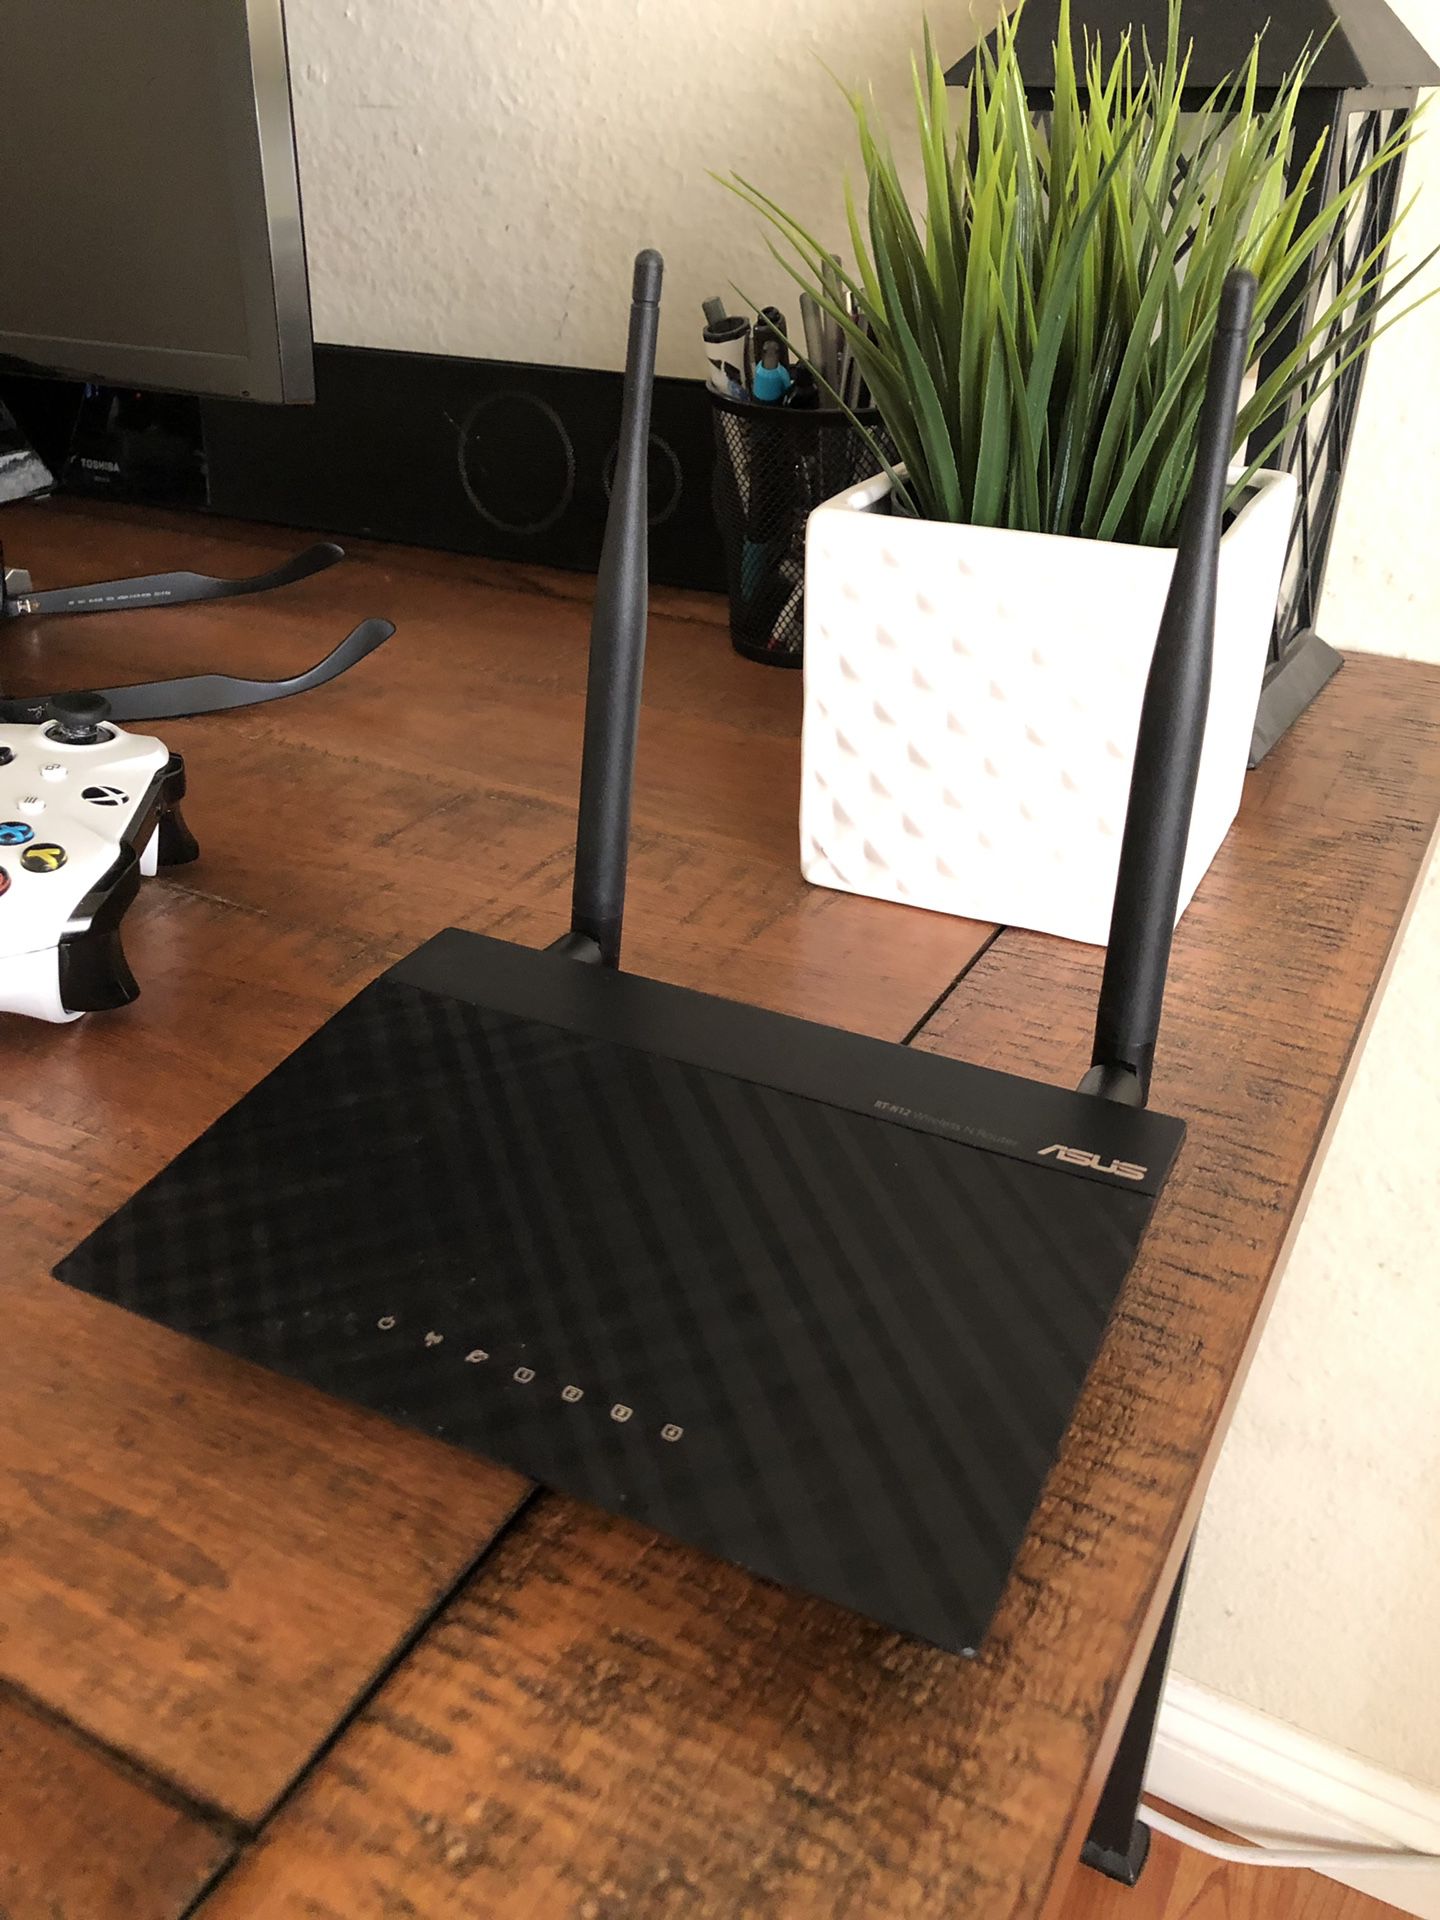 Asus RT-N12 Wireless Router